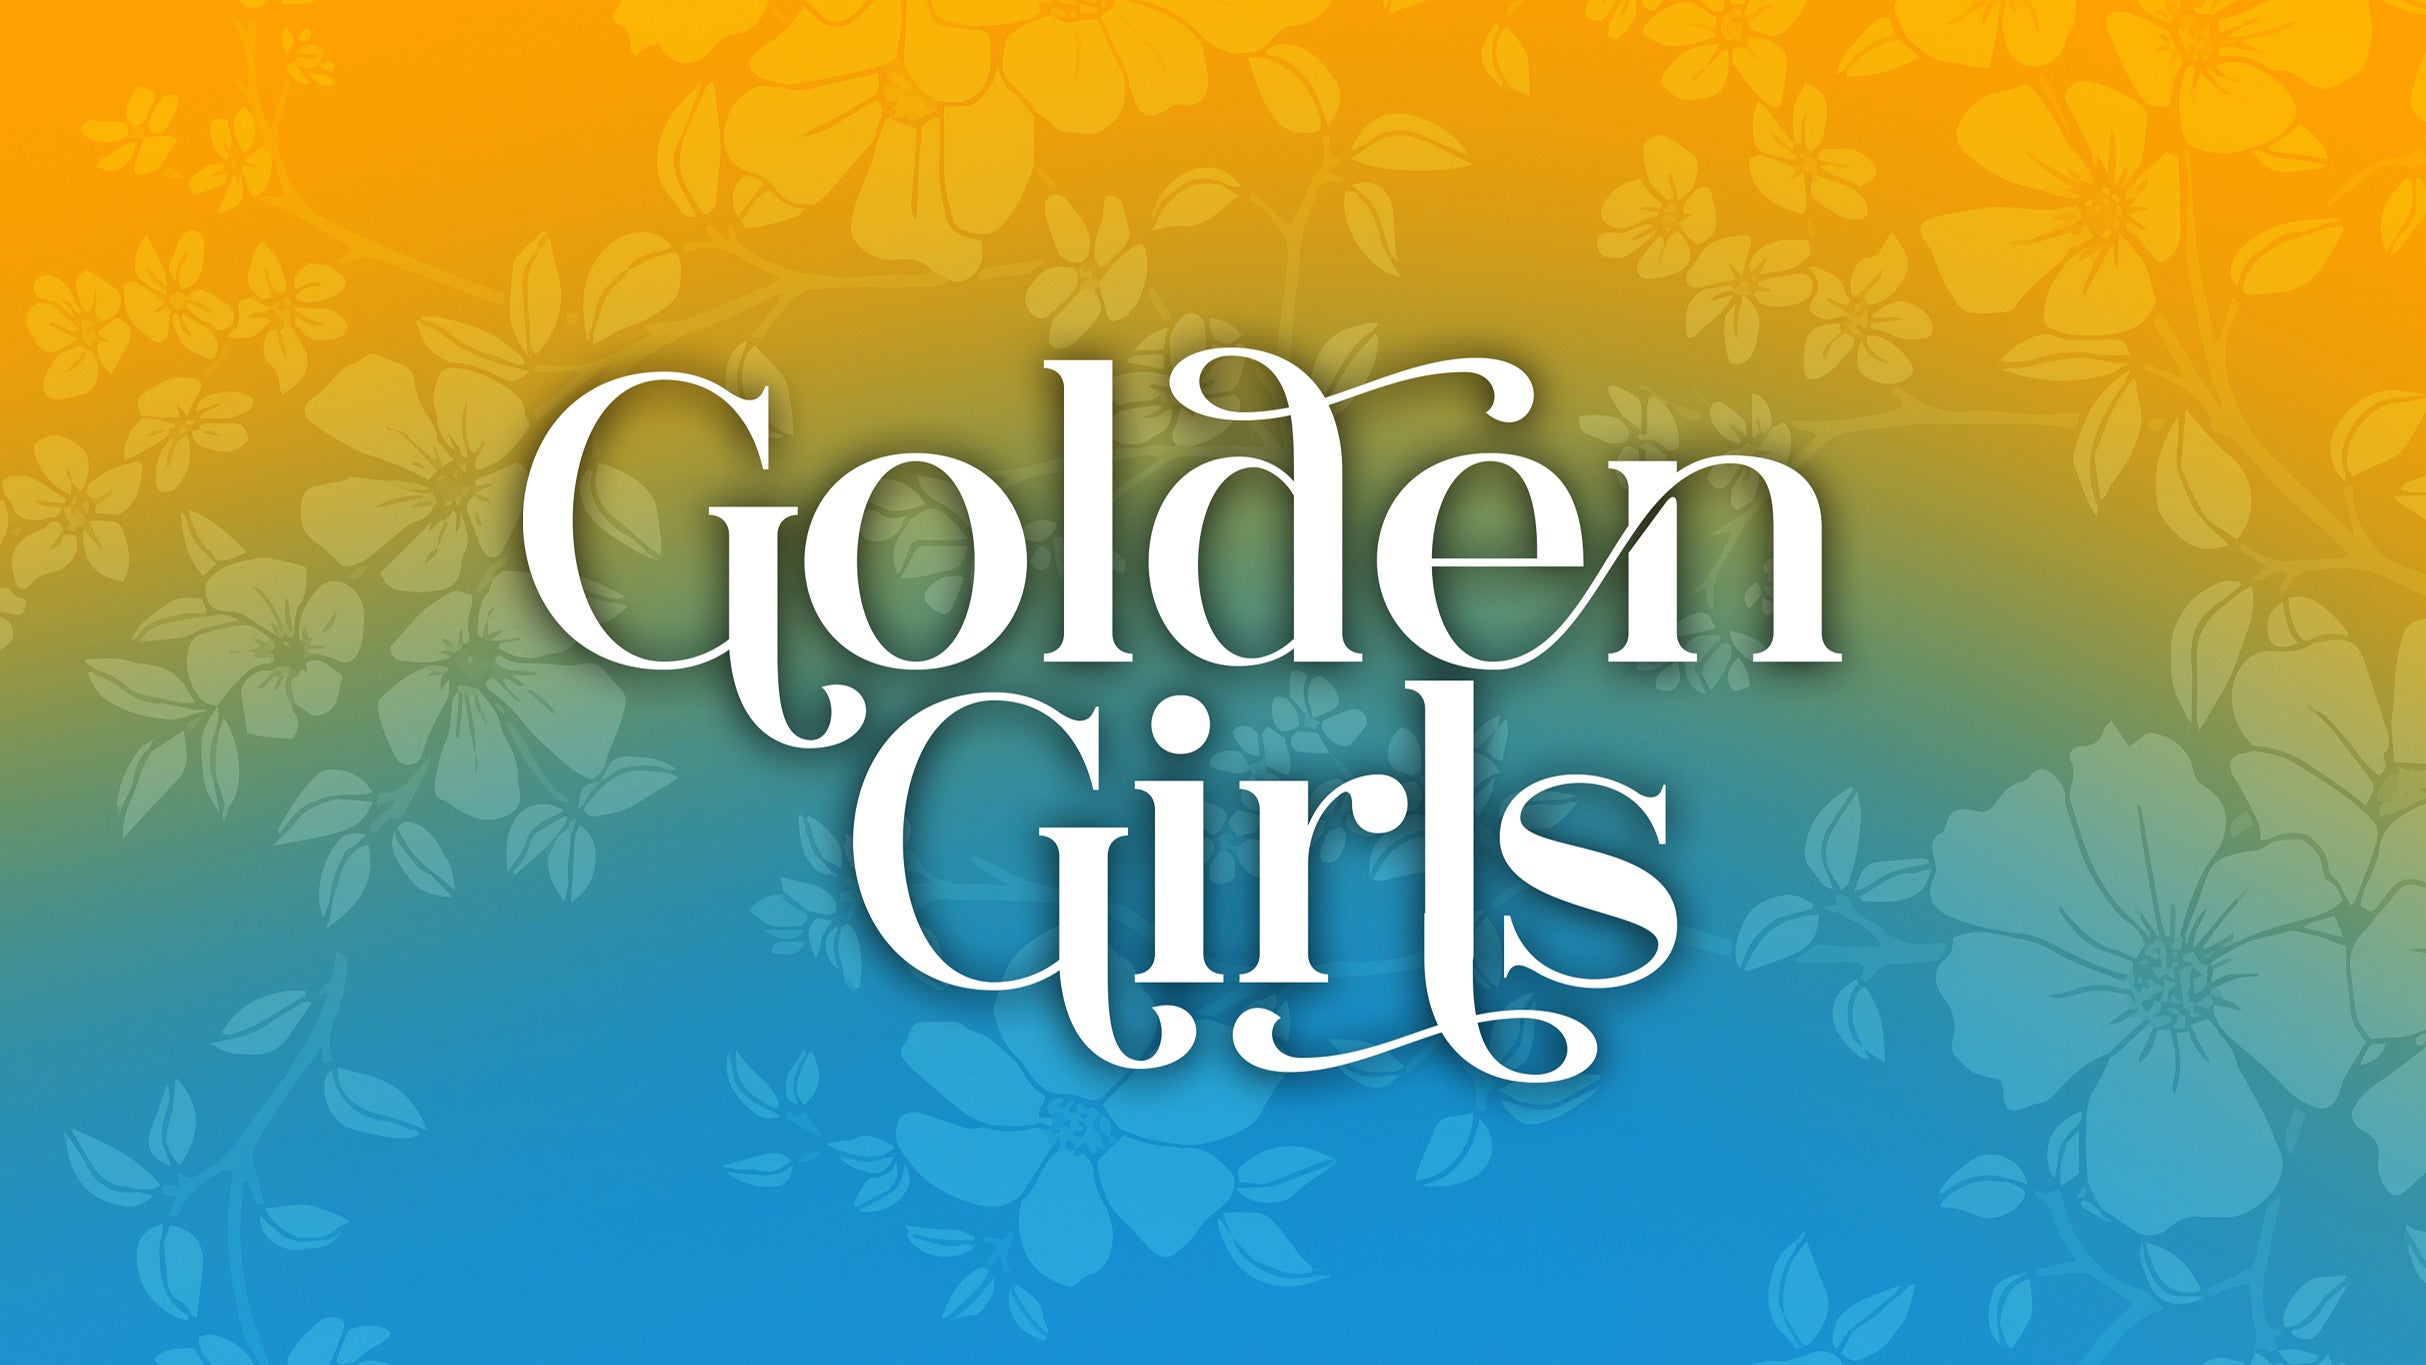 Golden Girls -The Laughs Continue in Binghamton promo photo for Official Platinum presale offer code